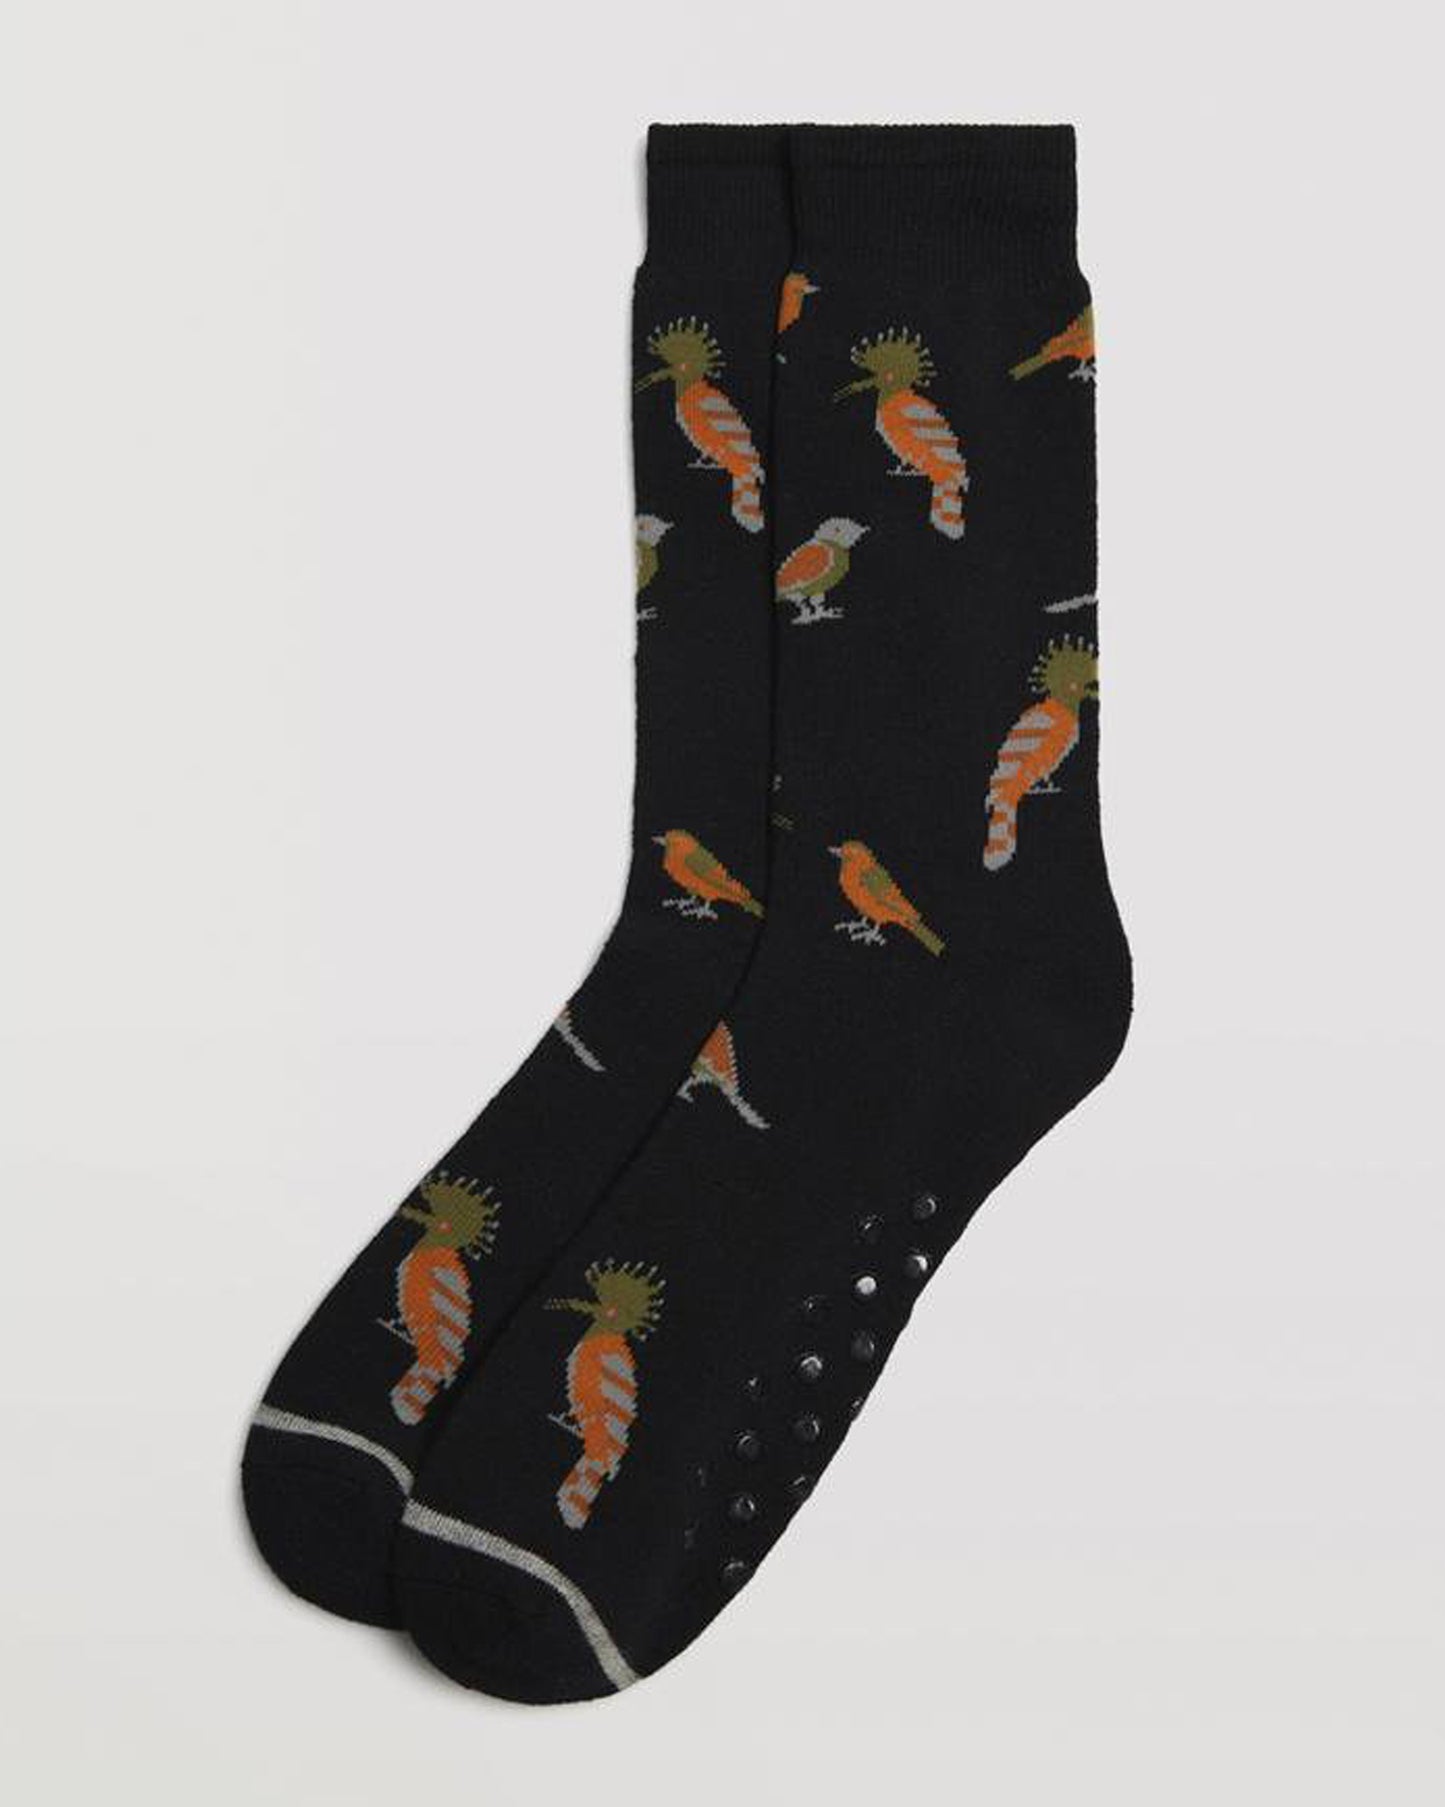 Ysabel Mora 22888 Bird Slipper Socks - Black thick and warm terry lined cotton mix crew length ankle socks with an all over exotic birds pattern in orange, khaki green and grey, dotted non-slip sole and deep elasticated comfort cuff.